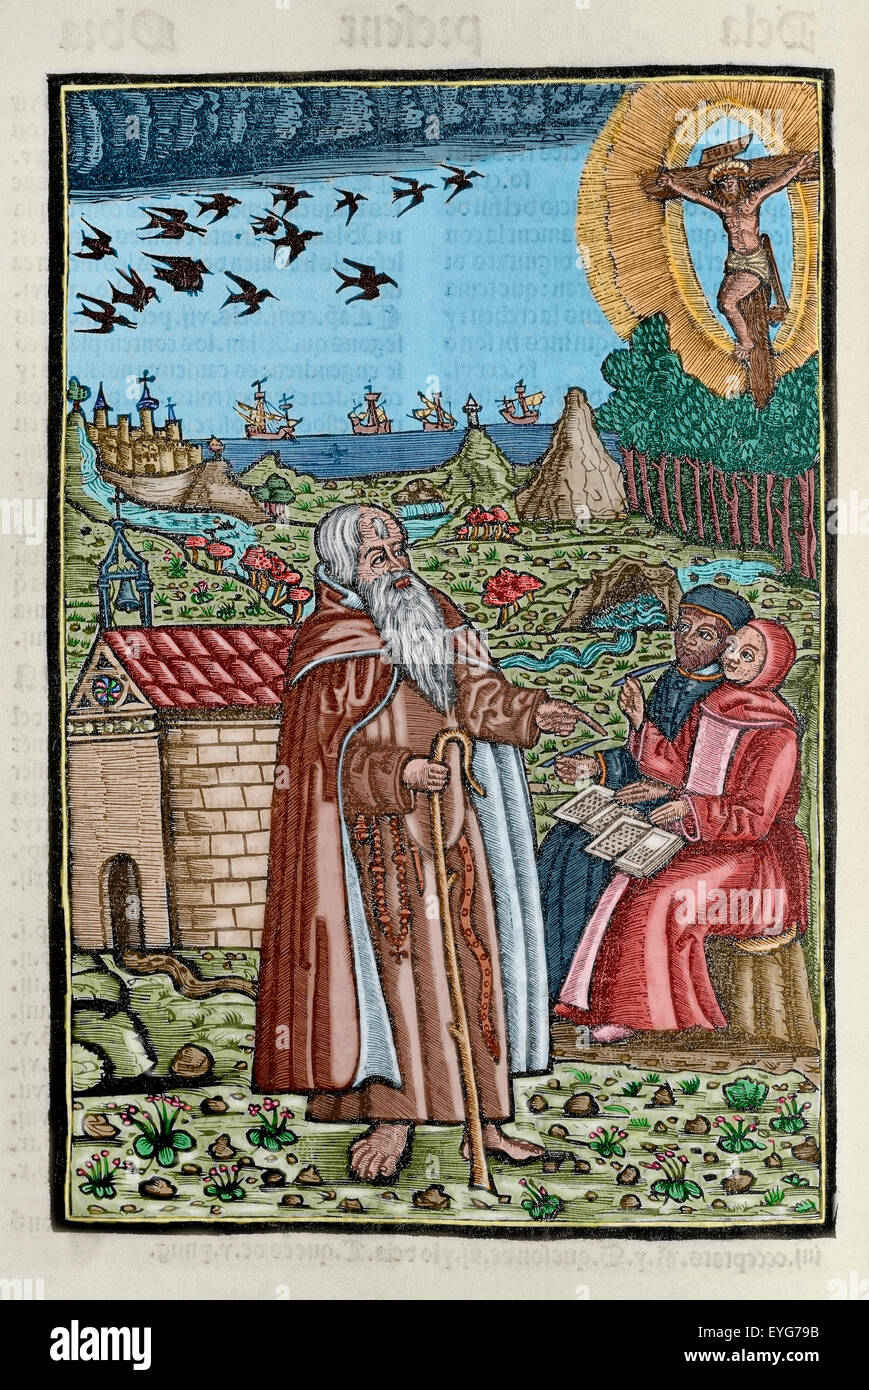 Ramon Llull (1235-1316). Spanish writer and philosopher. Blanquerna, ca.  1293. Engraving depicting Ramon Llull preaching or talking to two people or  disciples. Colored Stock Photo - Alamy